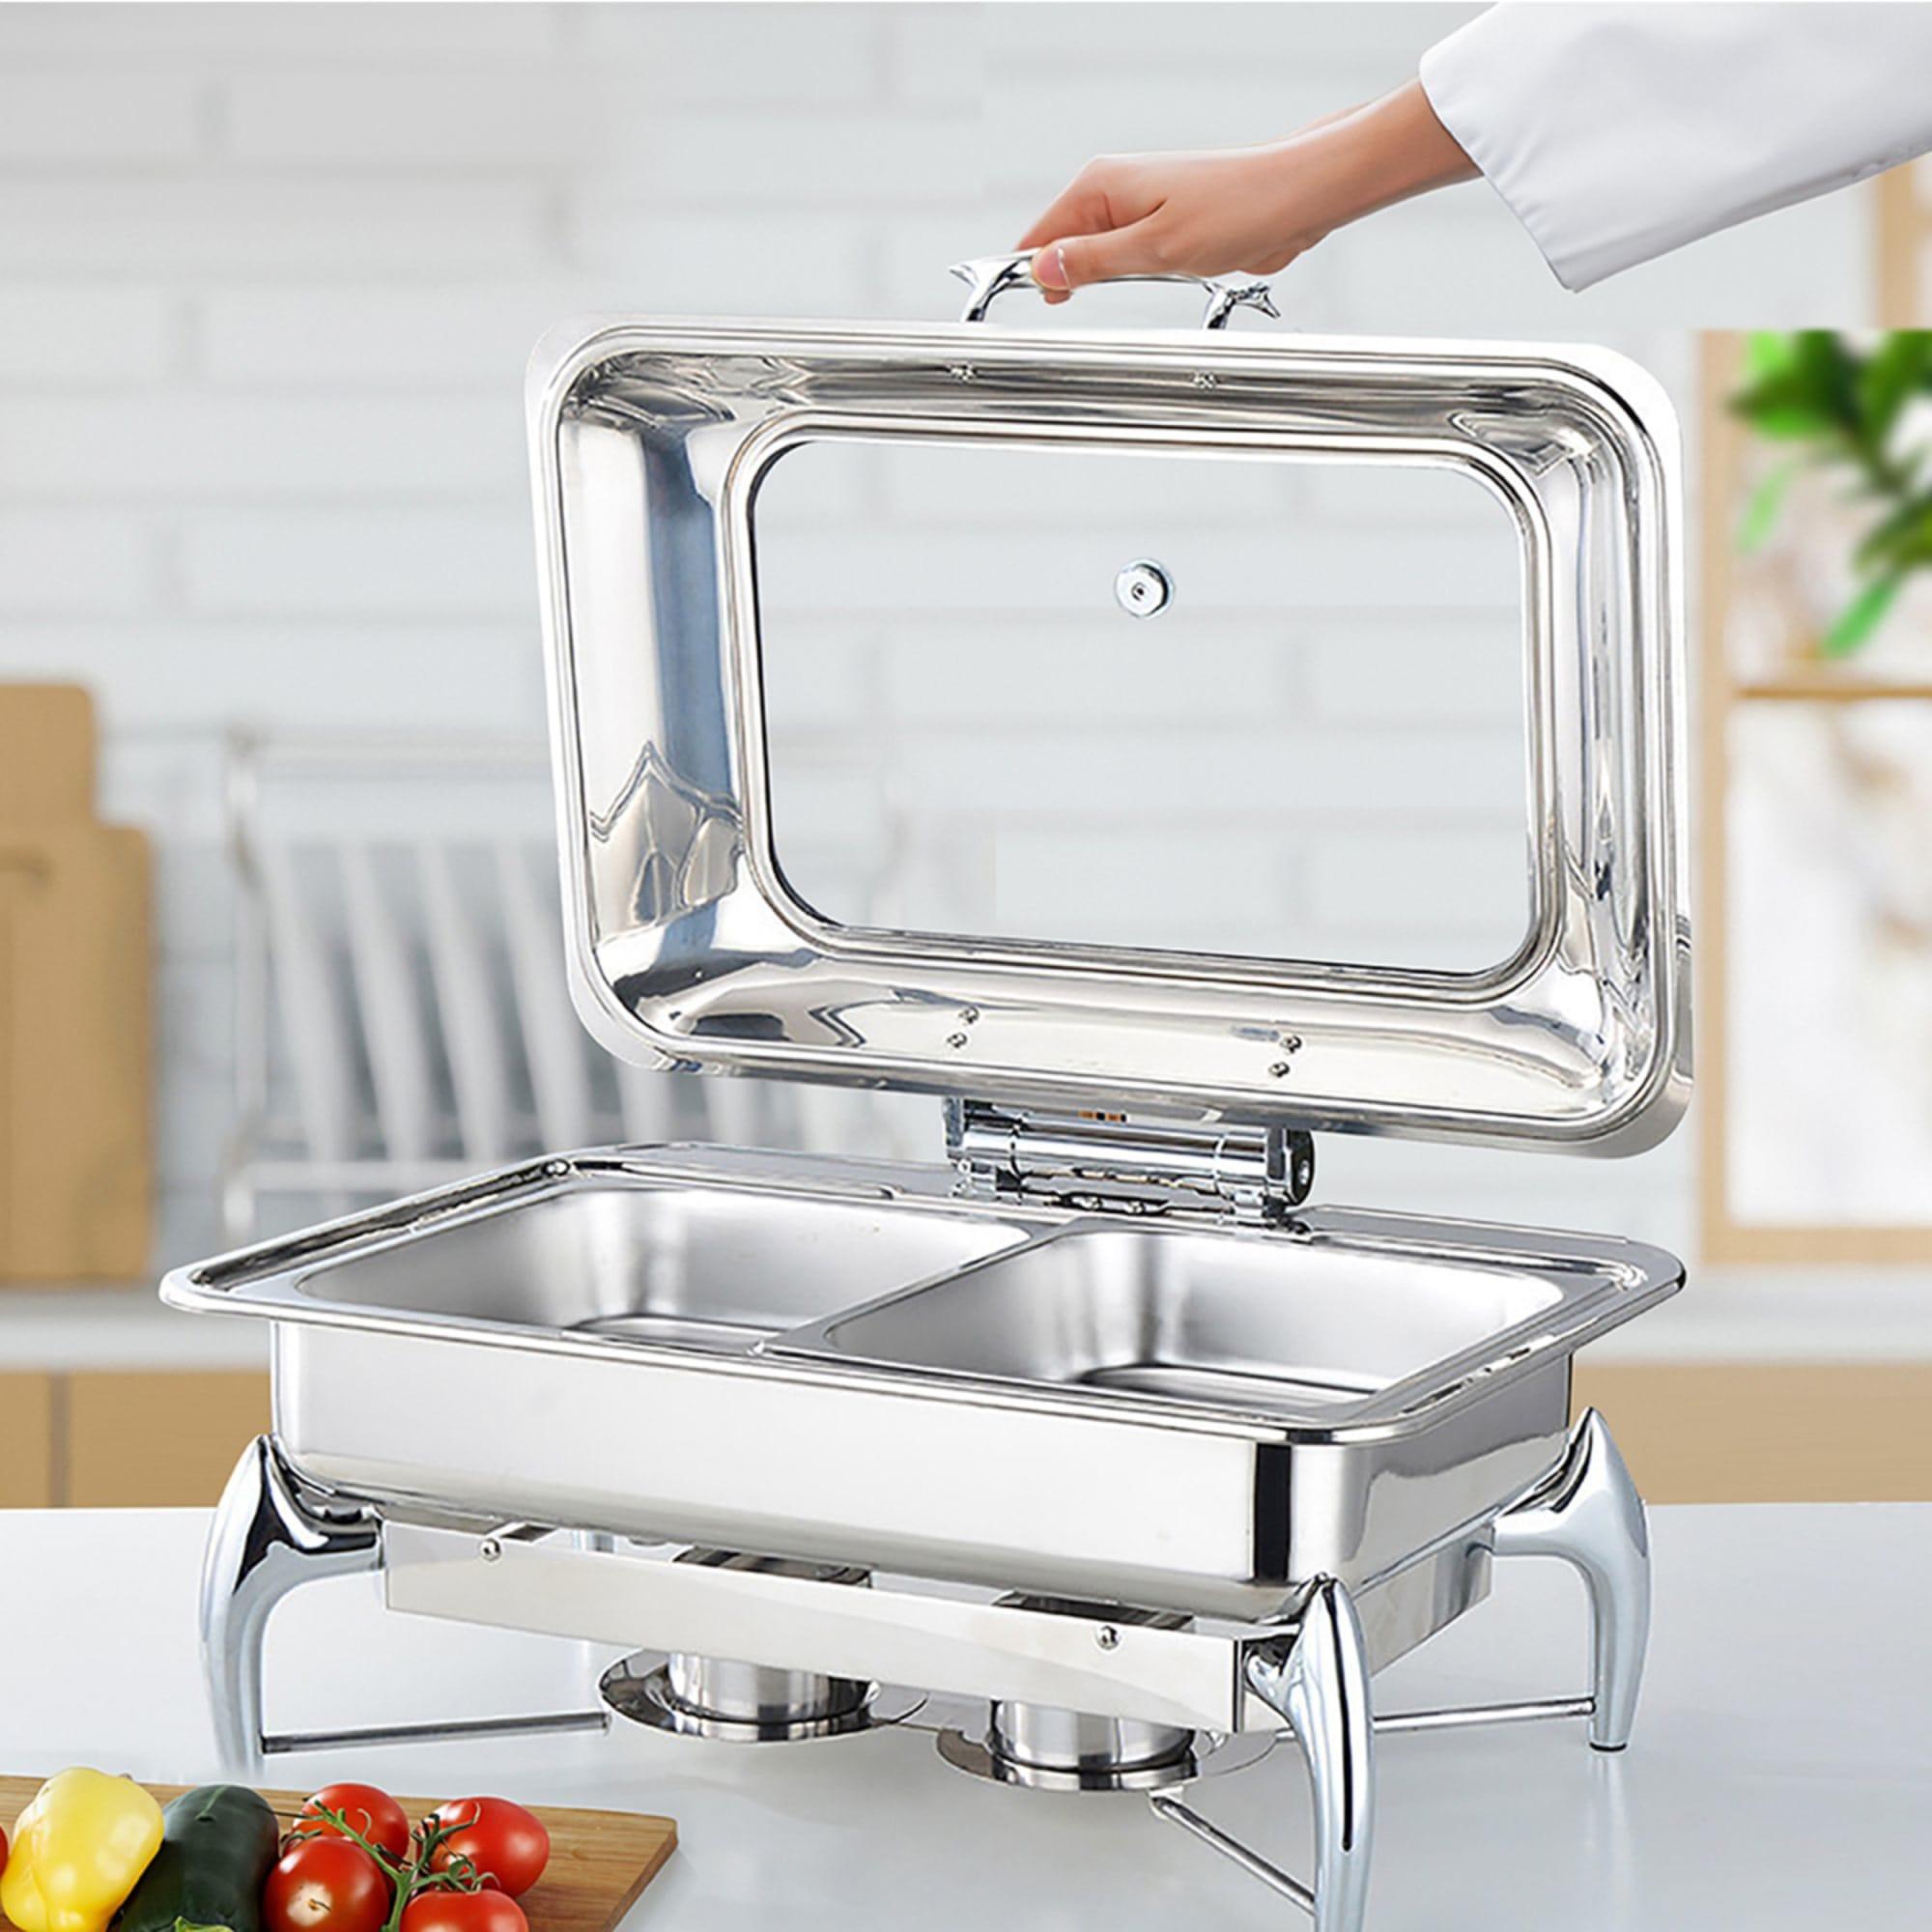 Soga Rectangular Stainless Steel Chafing Dish with Top Lid Image 7